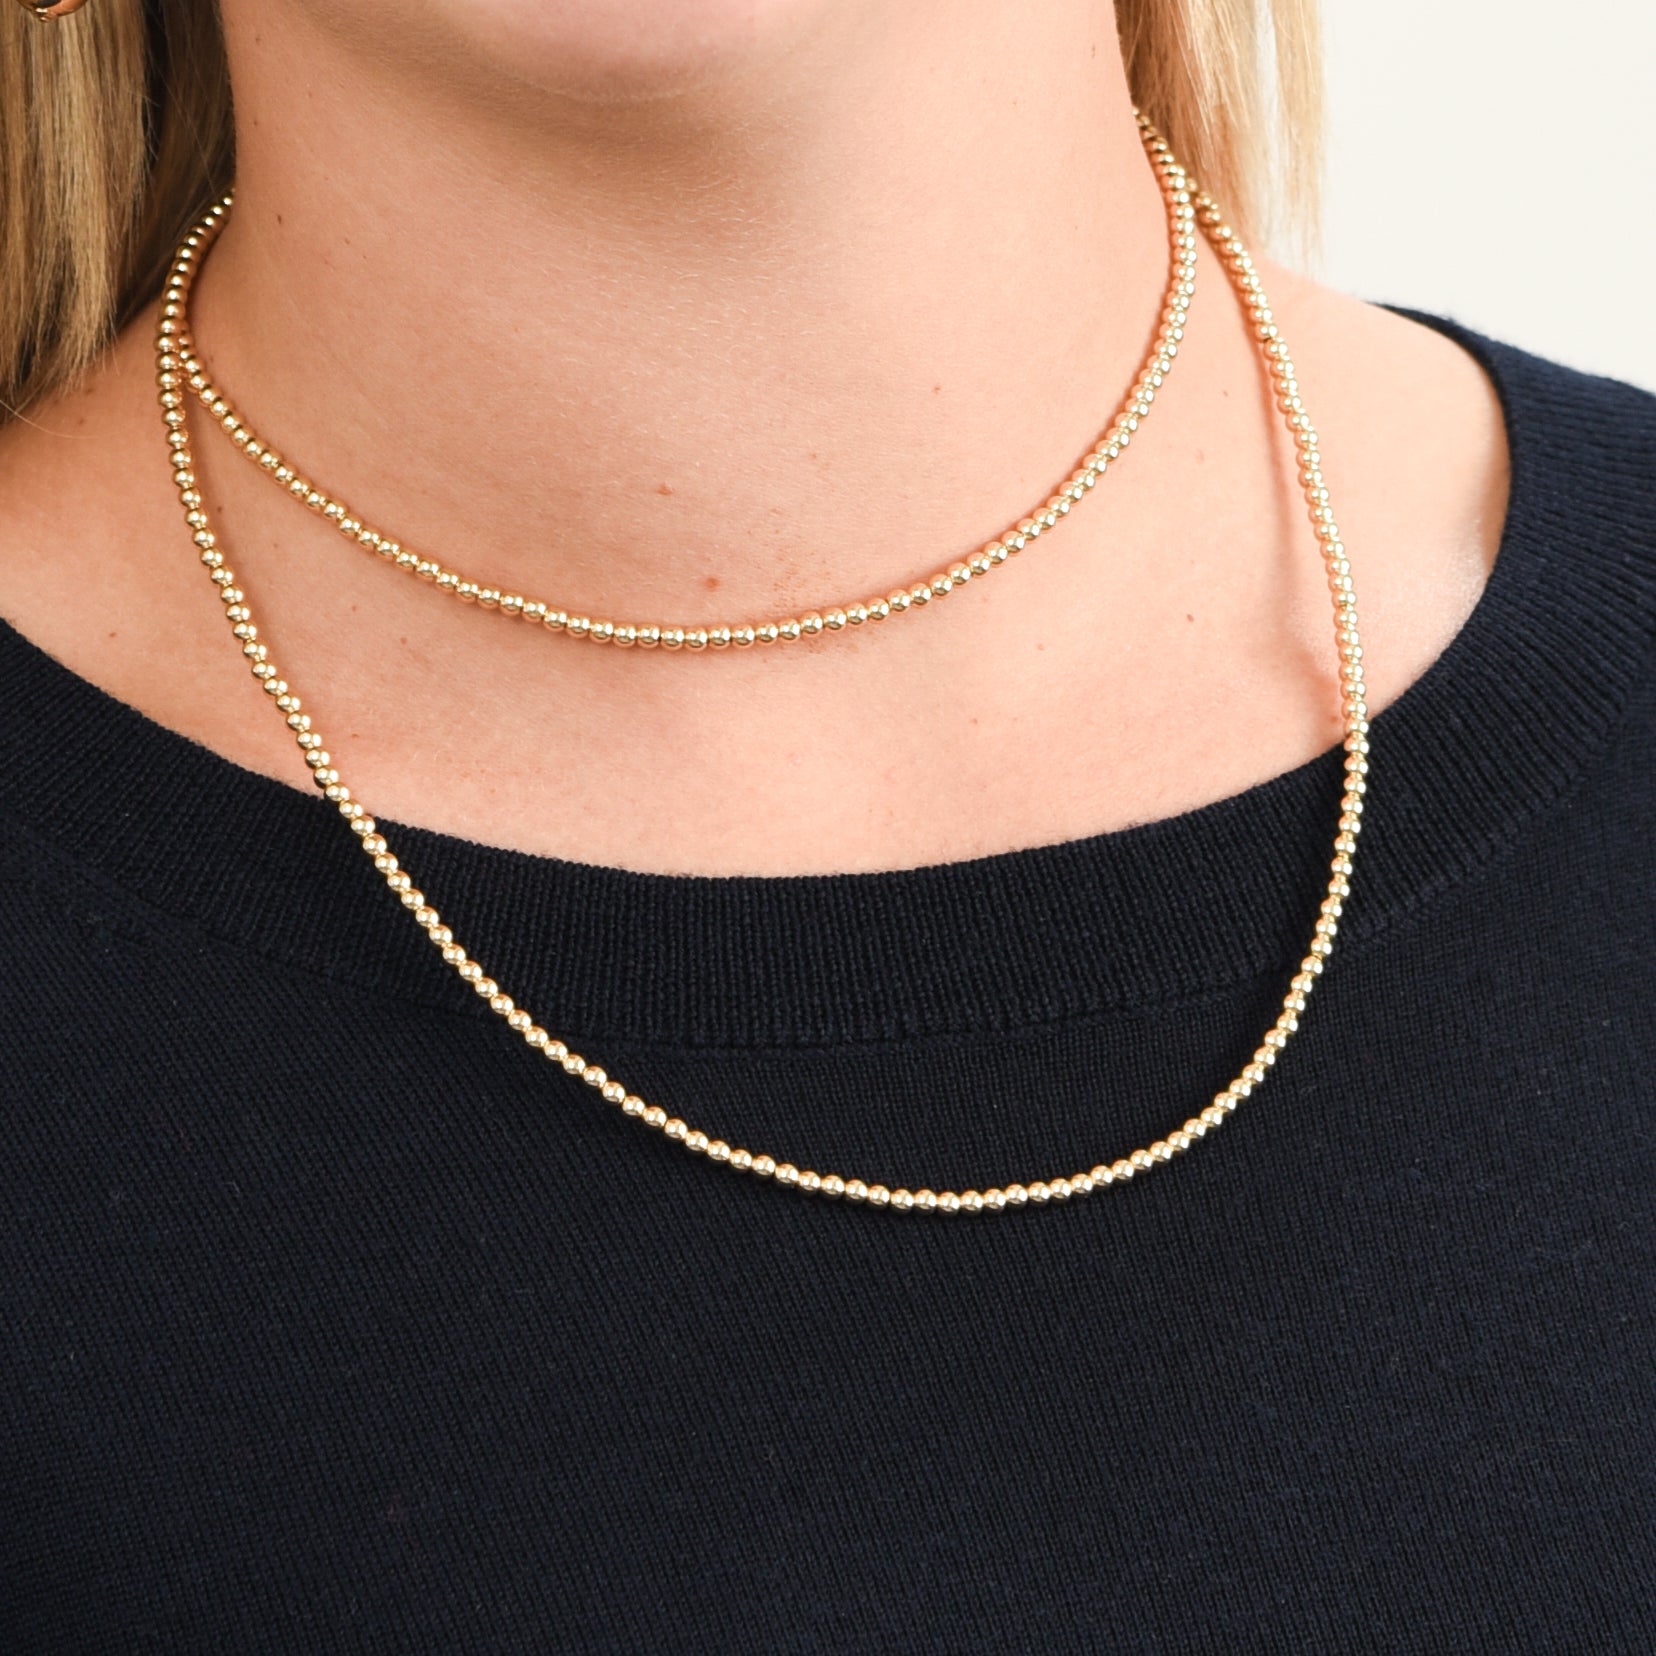 3mm 14k Gold Filled Beaded Wrap Necklace